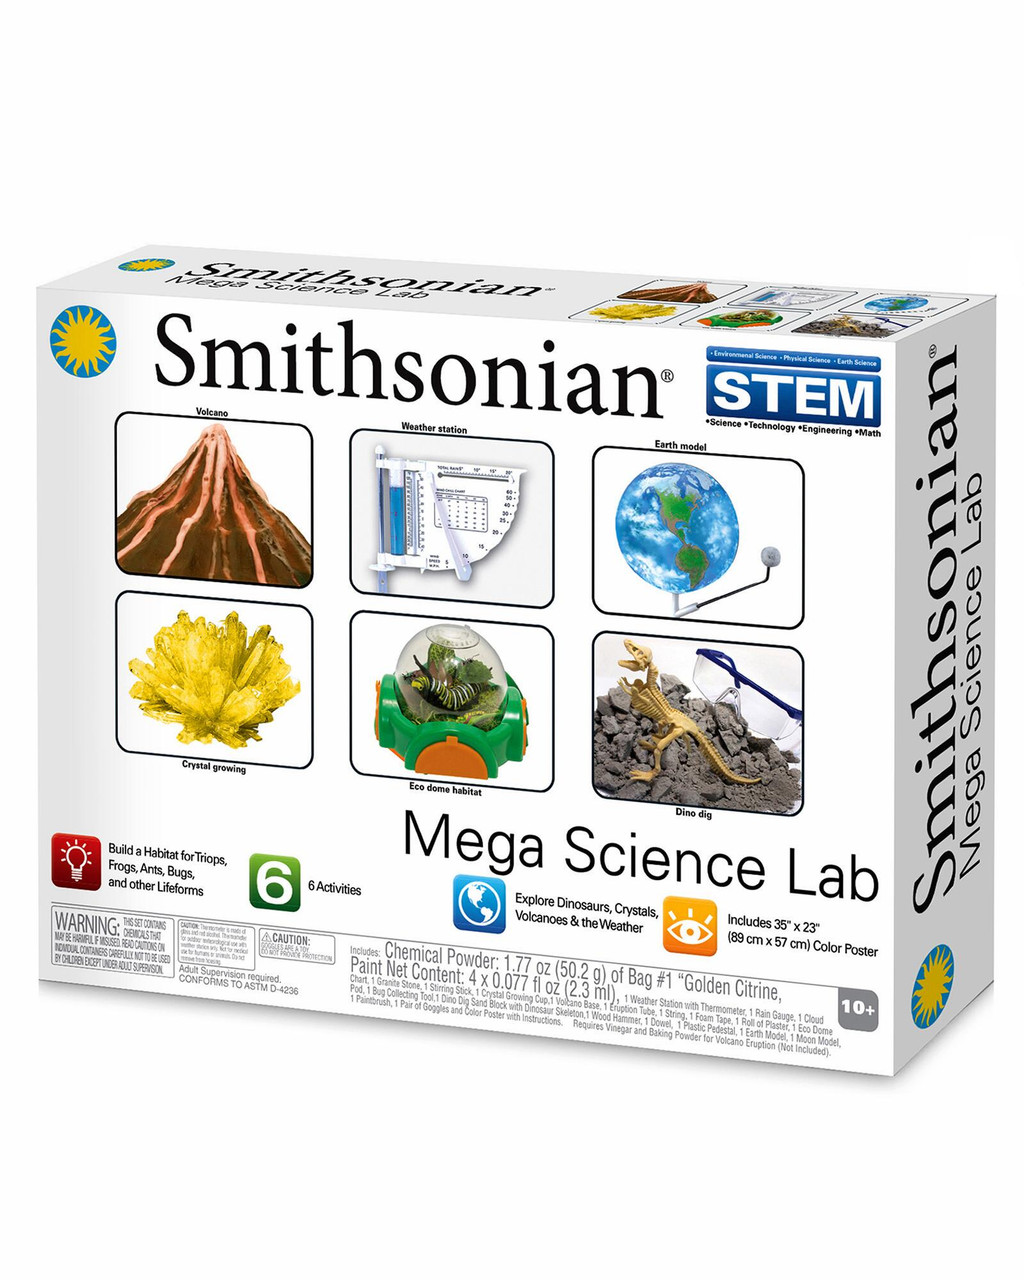 Ultimate STEM Gifts for Kids - The Stem Laboratory